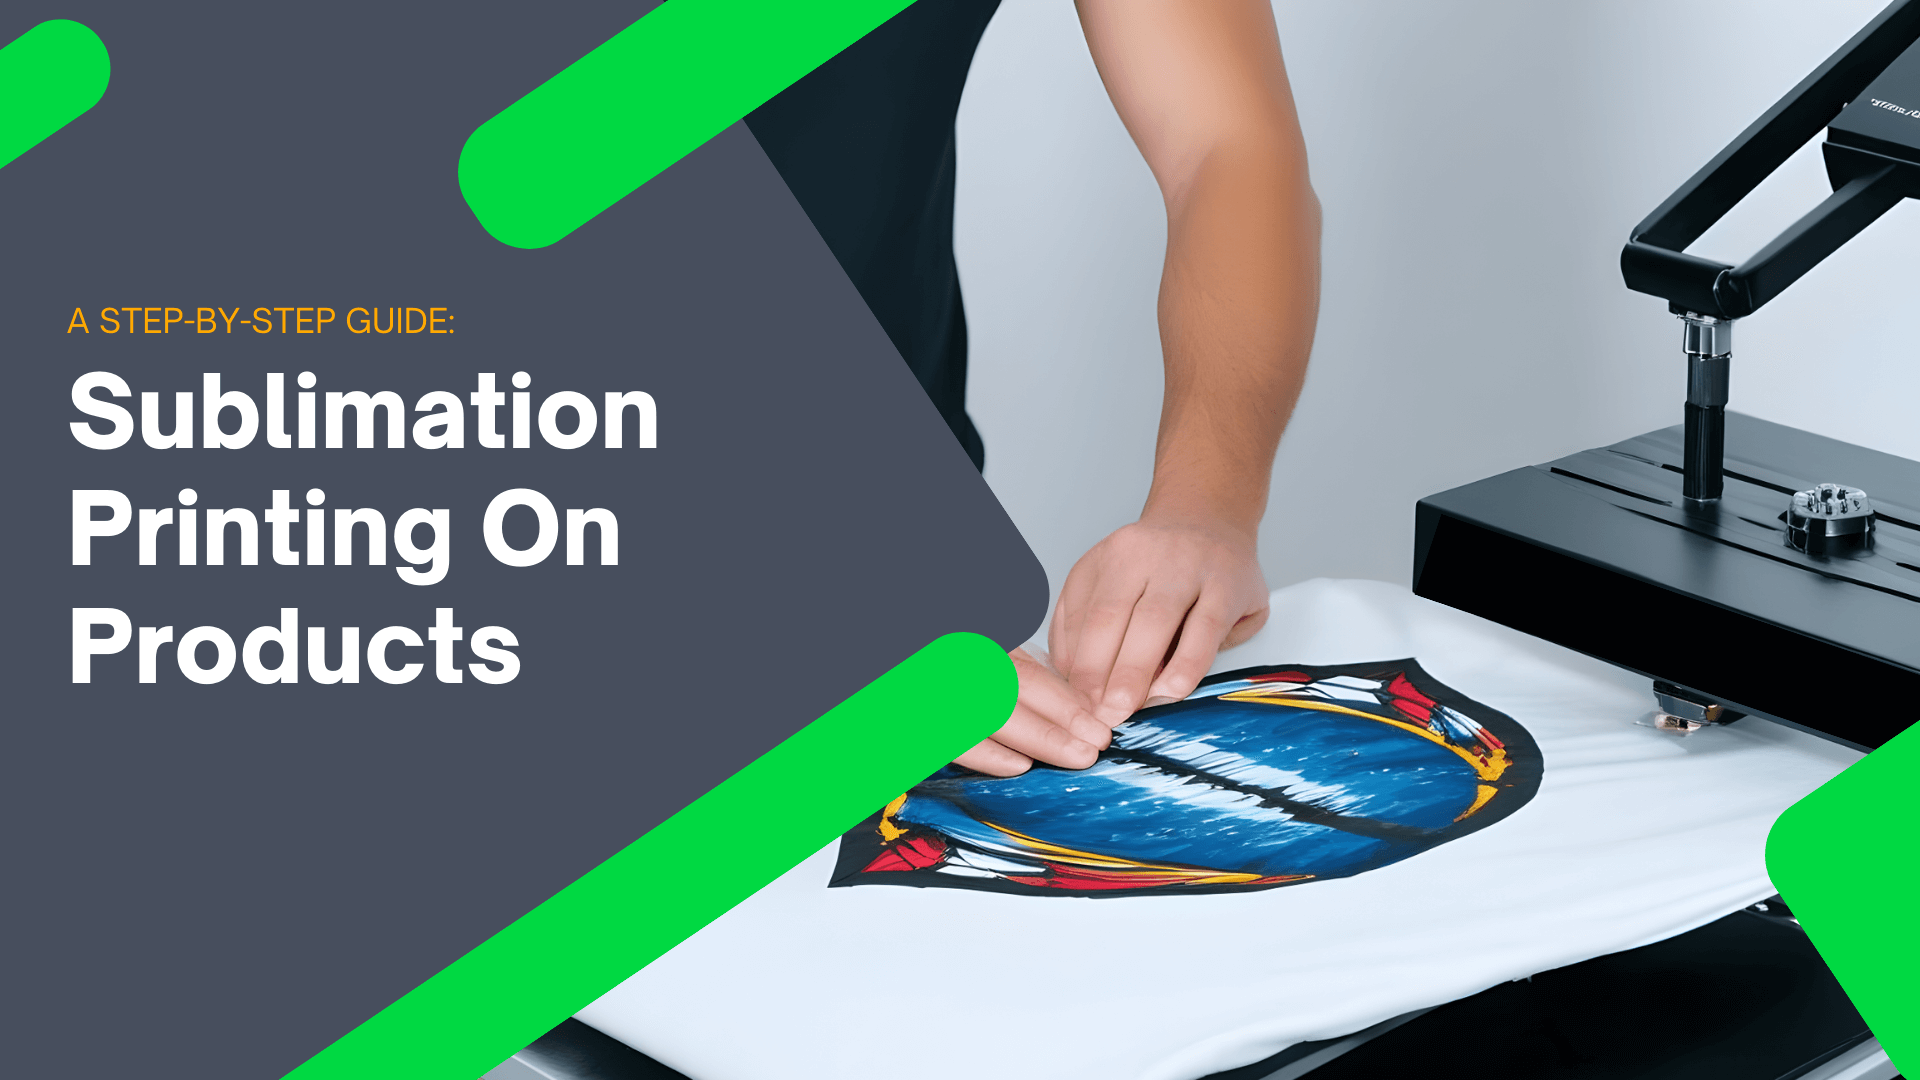 Guide to sublimation printing